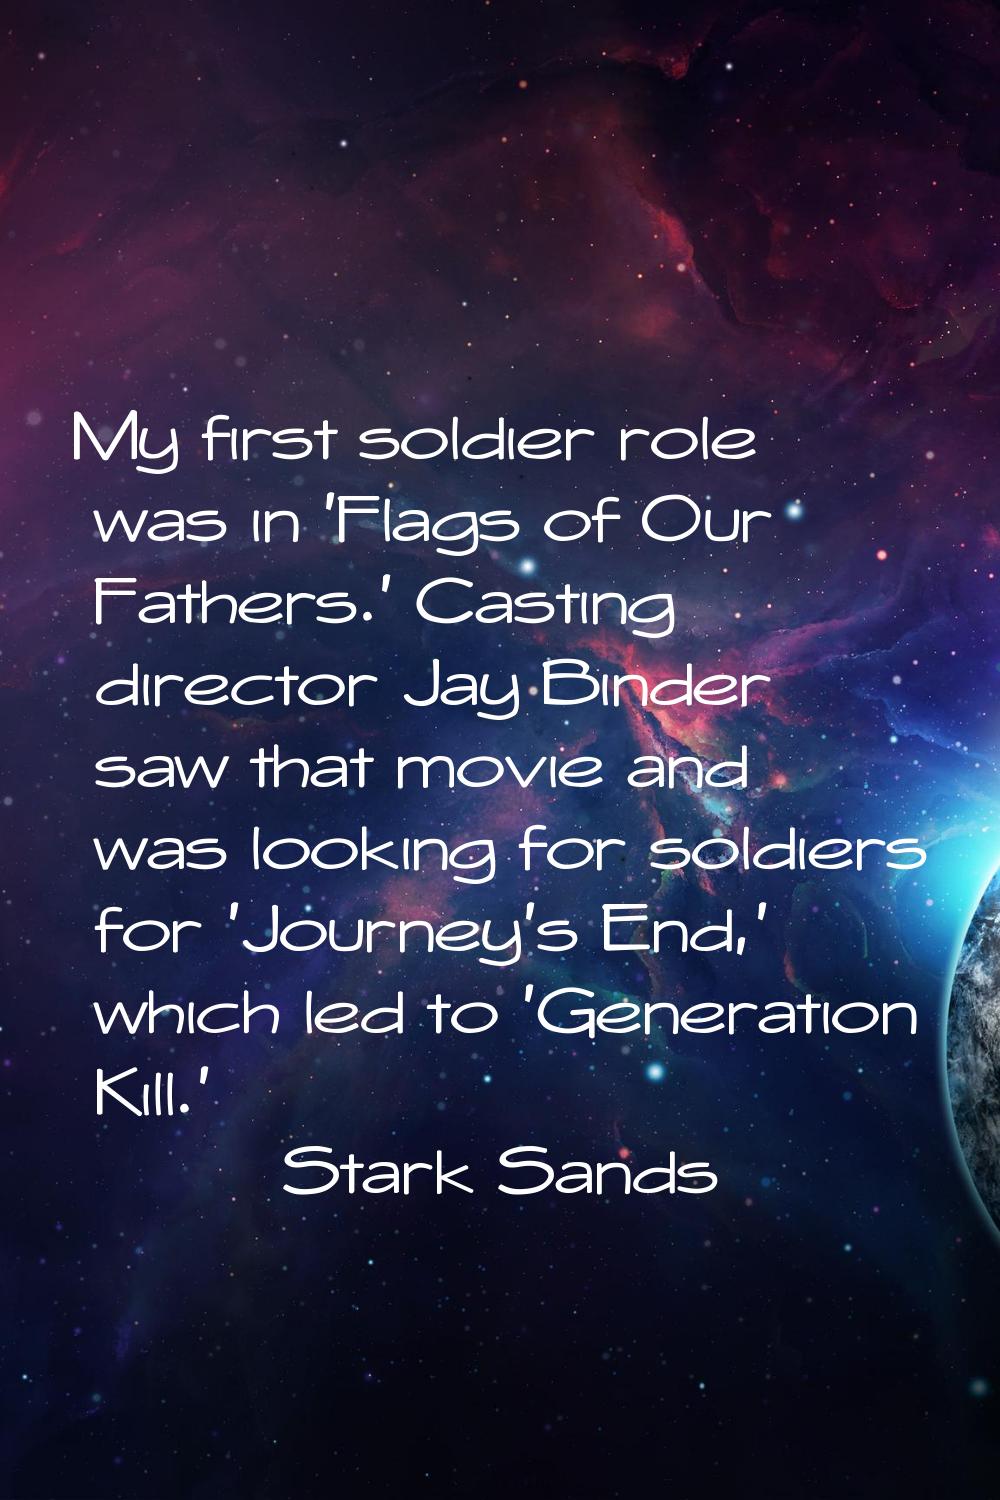 My first soldier role was in 'Flags of Our Fathers.' Casting director Jay Binder saw that movie and